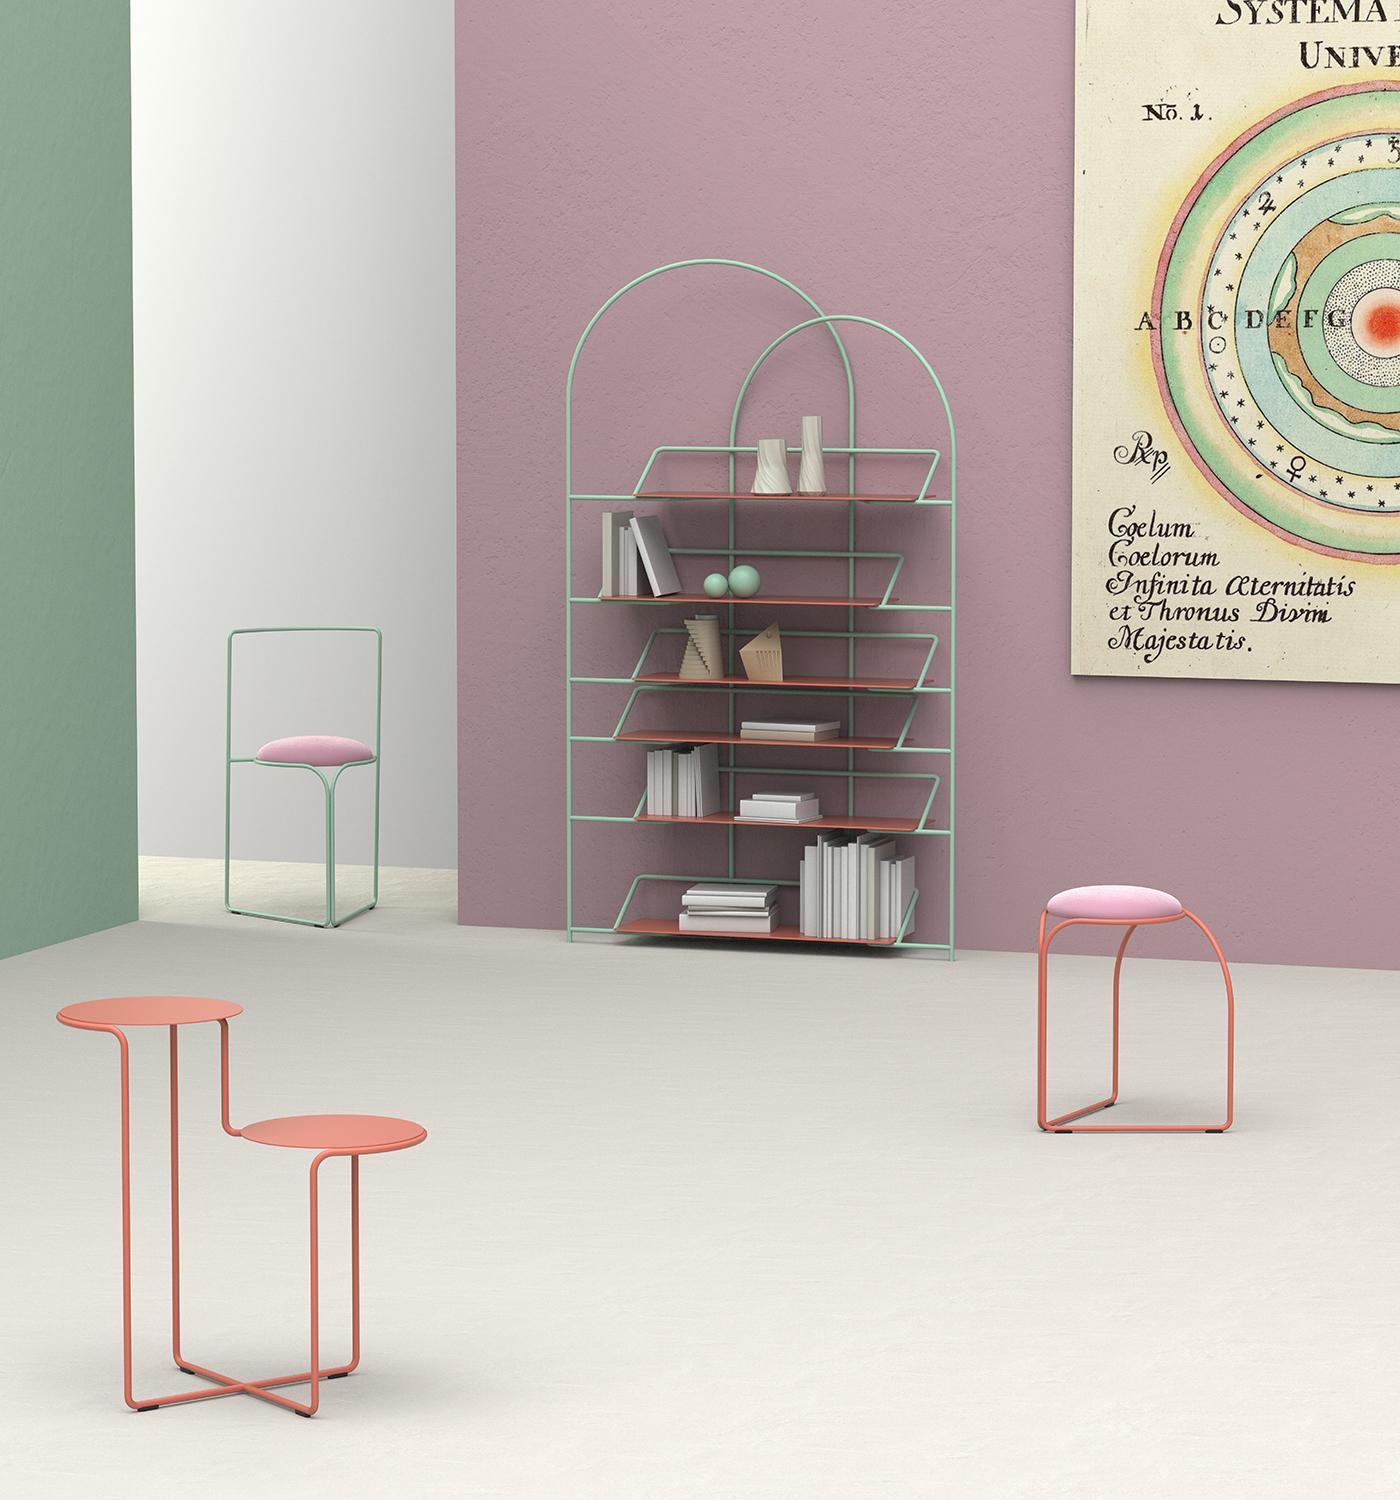 Two arches enclose and enhance stacks of books gently suspended from a light and resistant structure. 
Designed by Enrico Girotti for lapiegaWD LateB is a sculptural bookcase available in a painted or galvanized finish. The shelves are available in